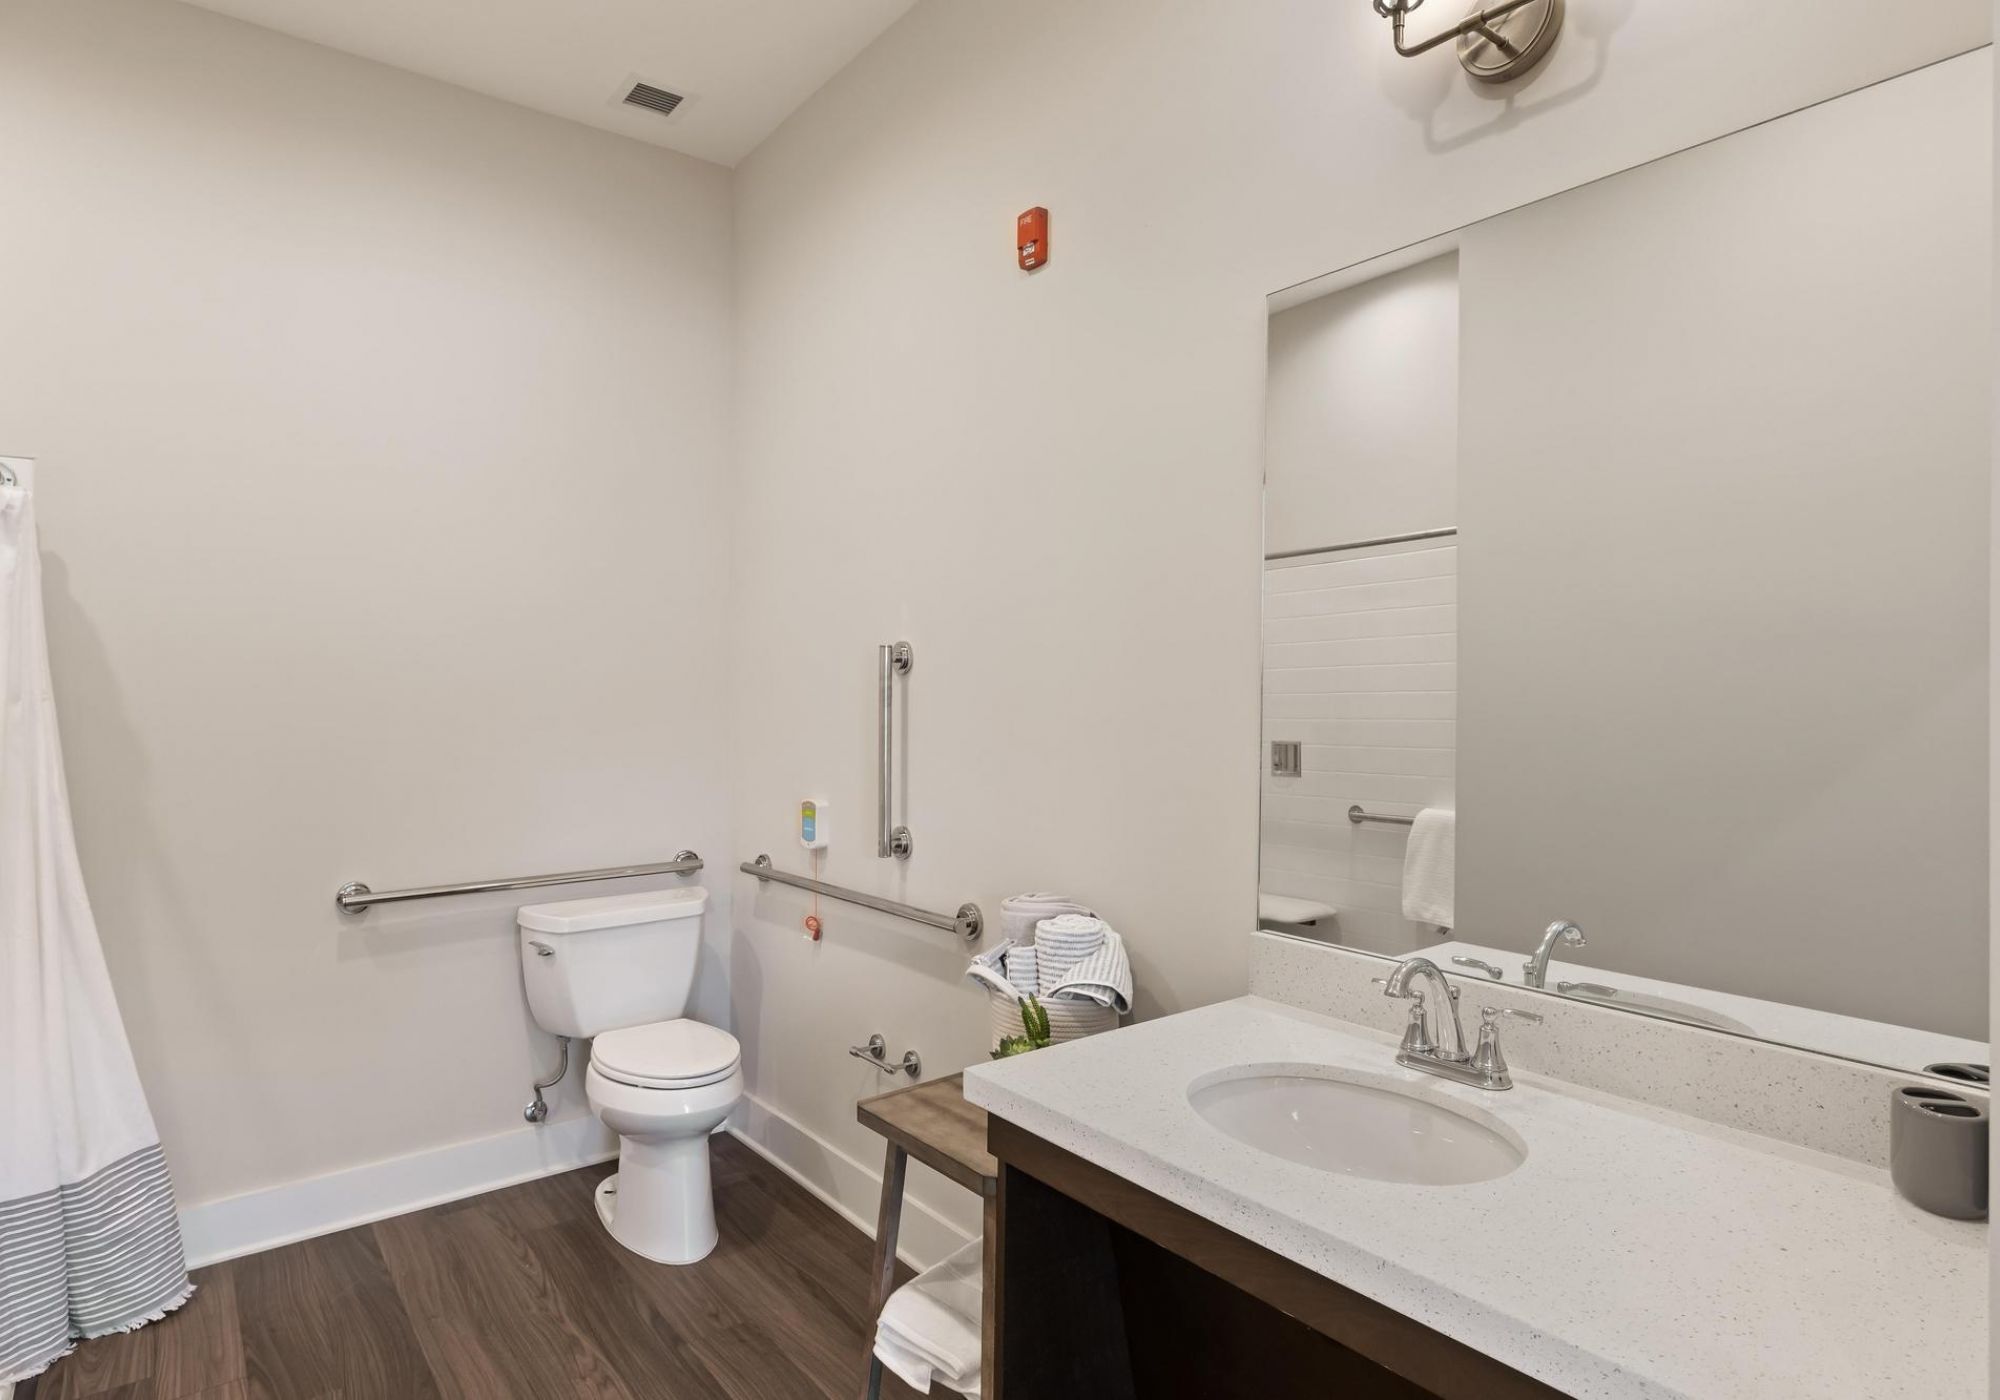 The Preserve at Meridian senior living bathroom showing accessibility features including handrails, lower sink height, and zero-entry shower